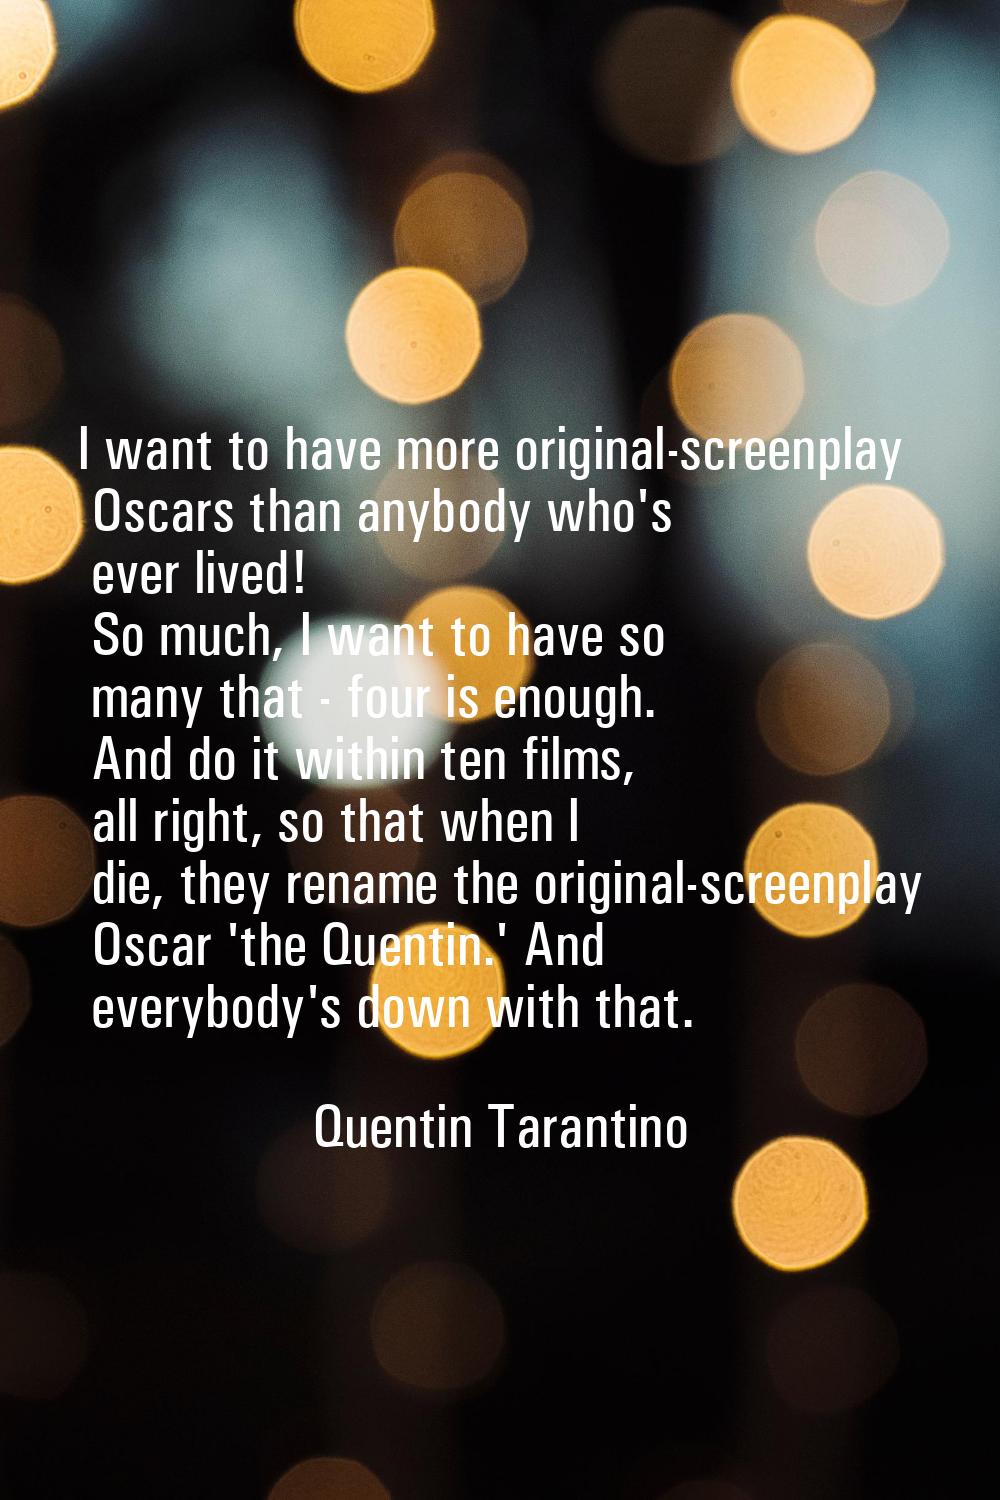 I want to have more original-screenplay Oscars than anybody who's ever lived! So much, I want to ha